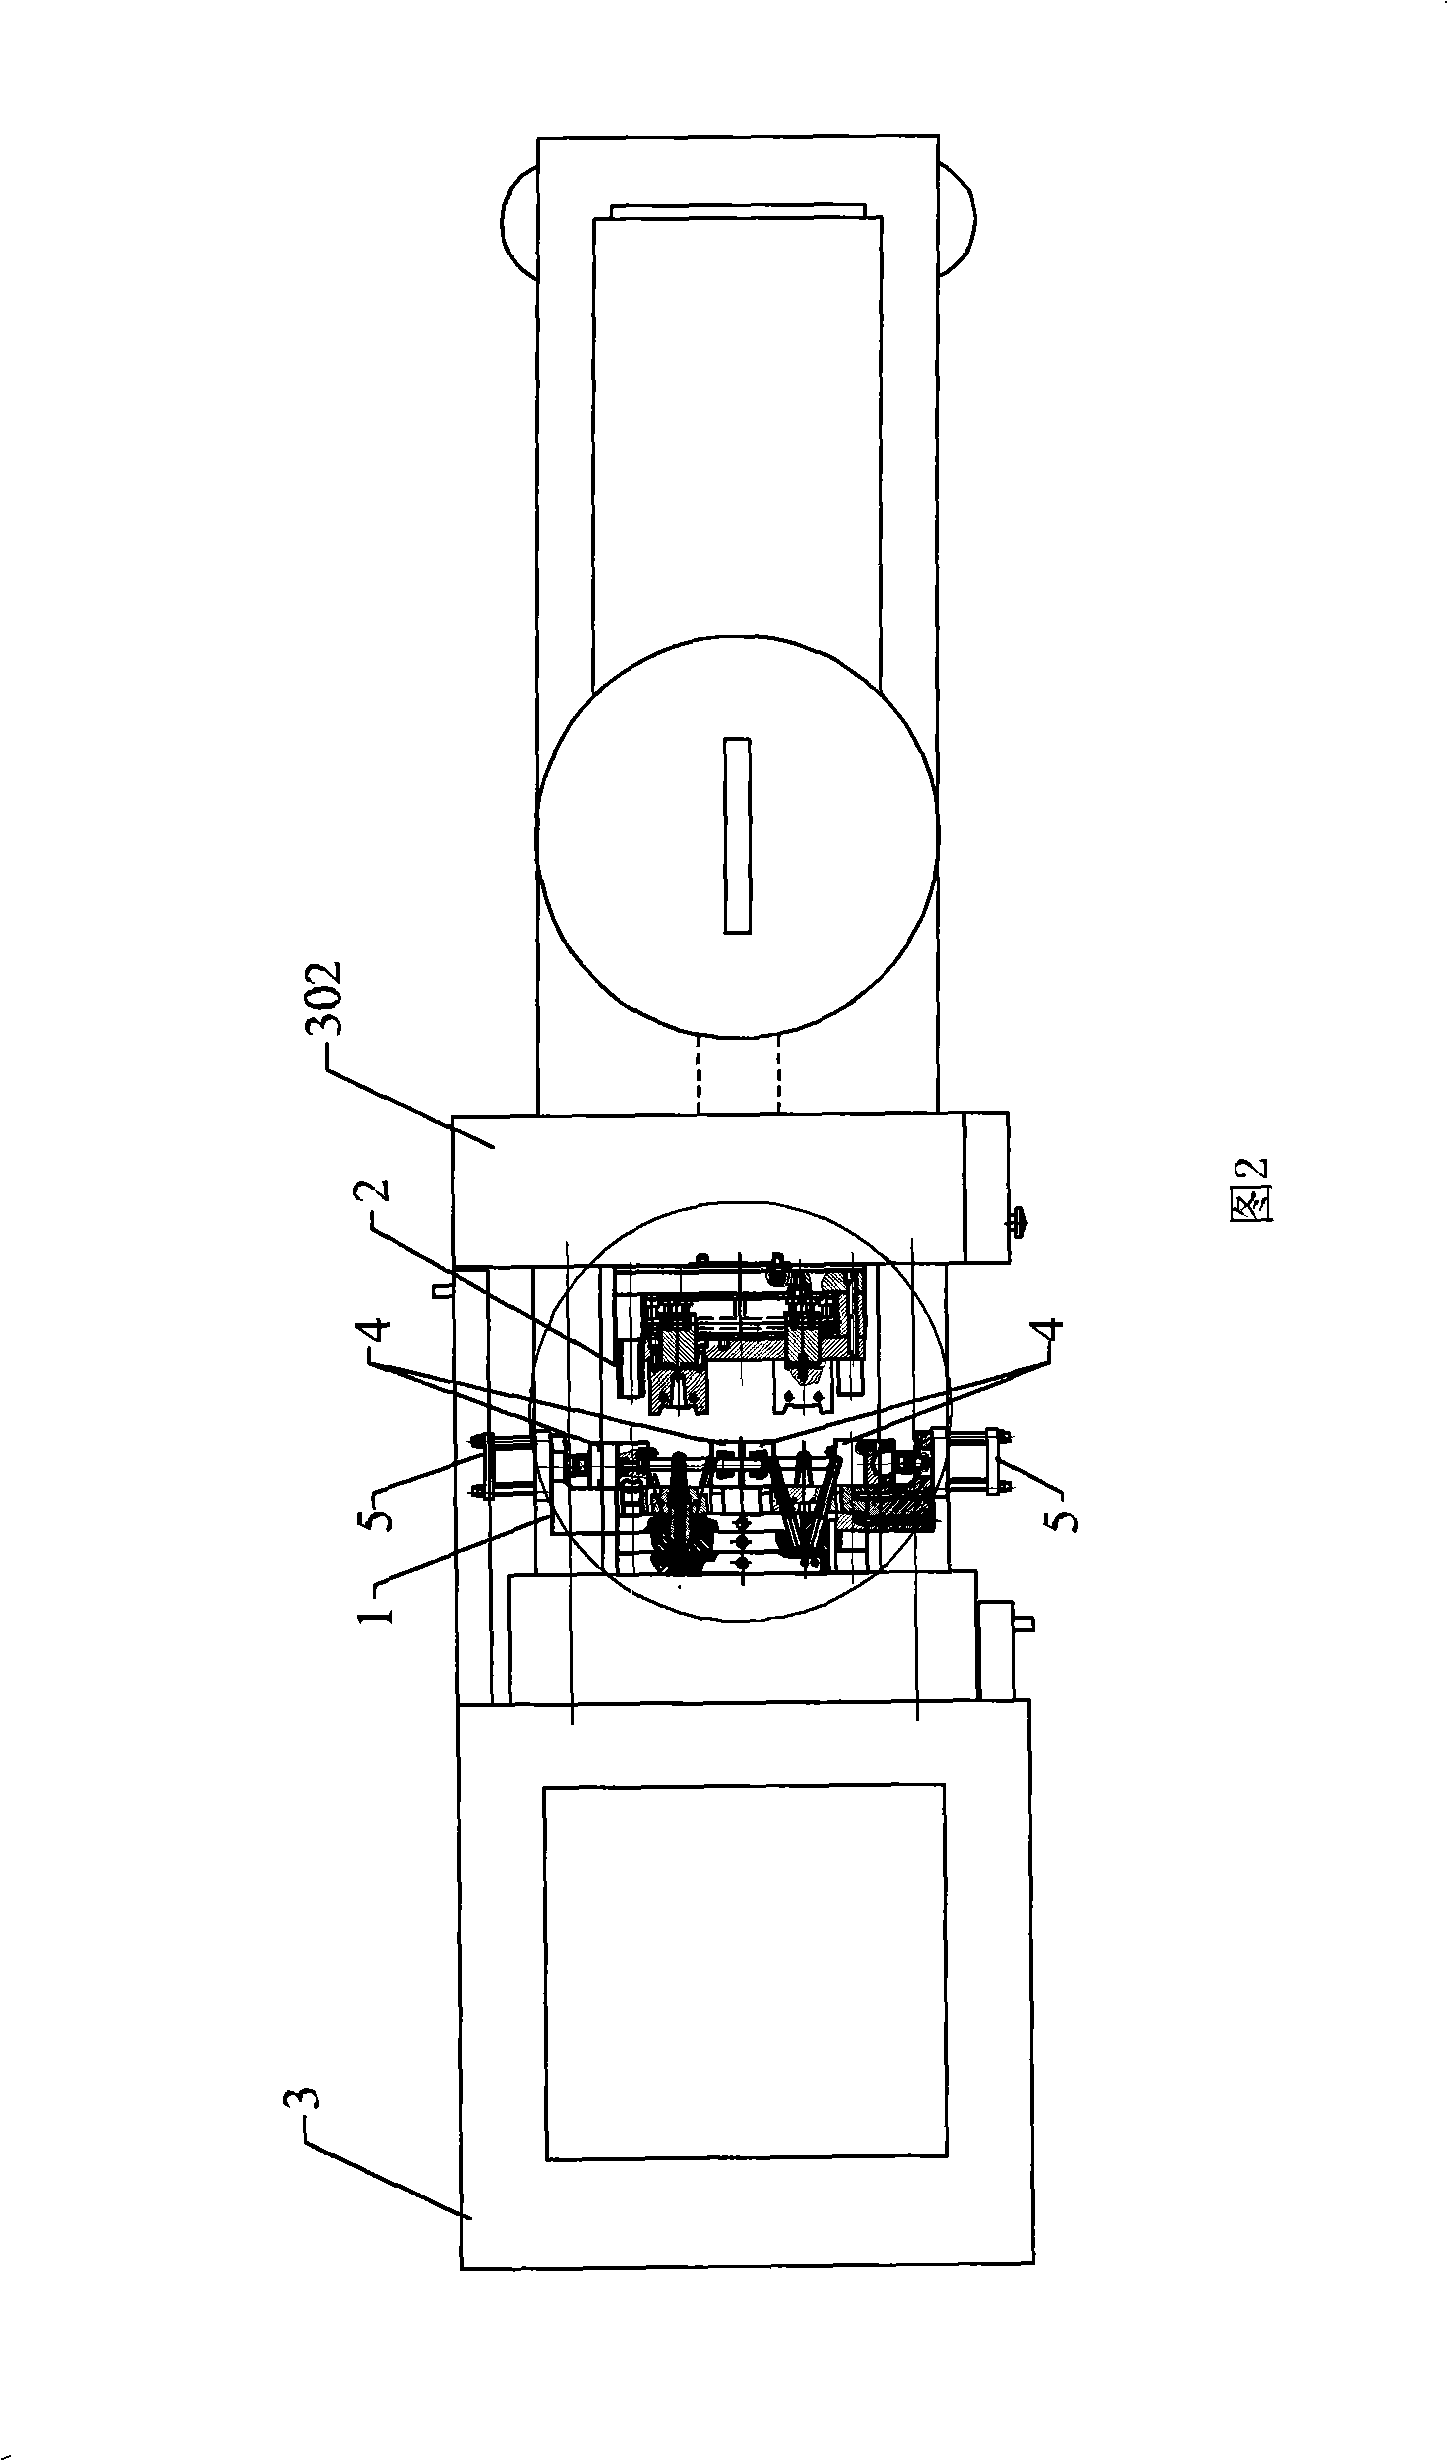 Die for injecting and blowing plastic hollow container forming container by one-step method and single working-station, and application thereof